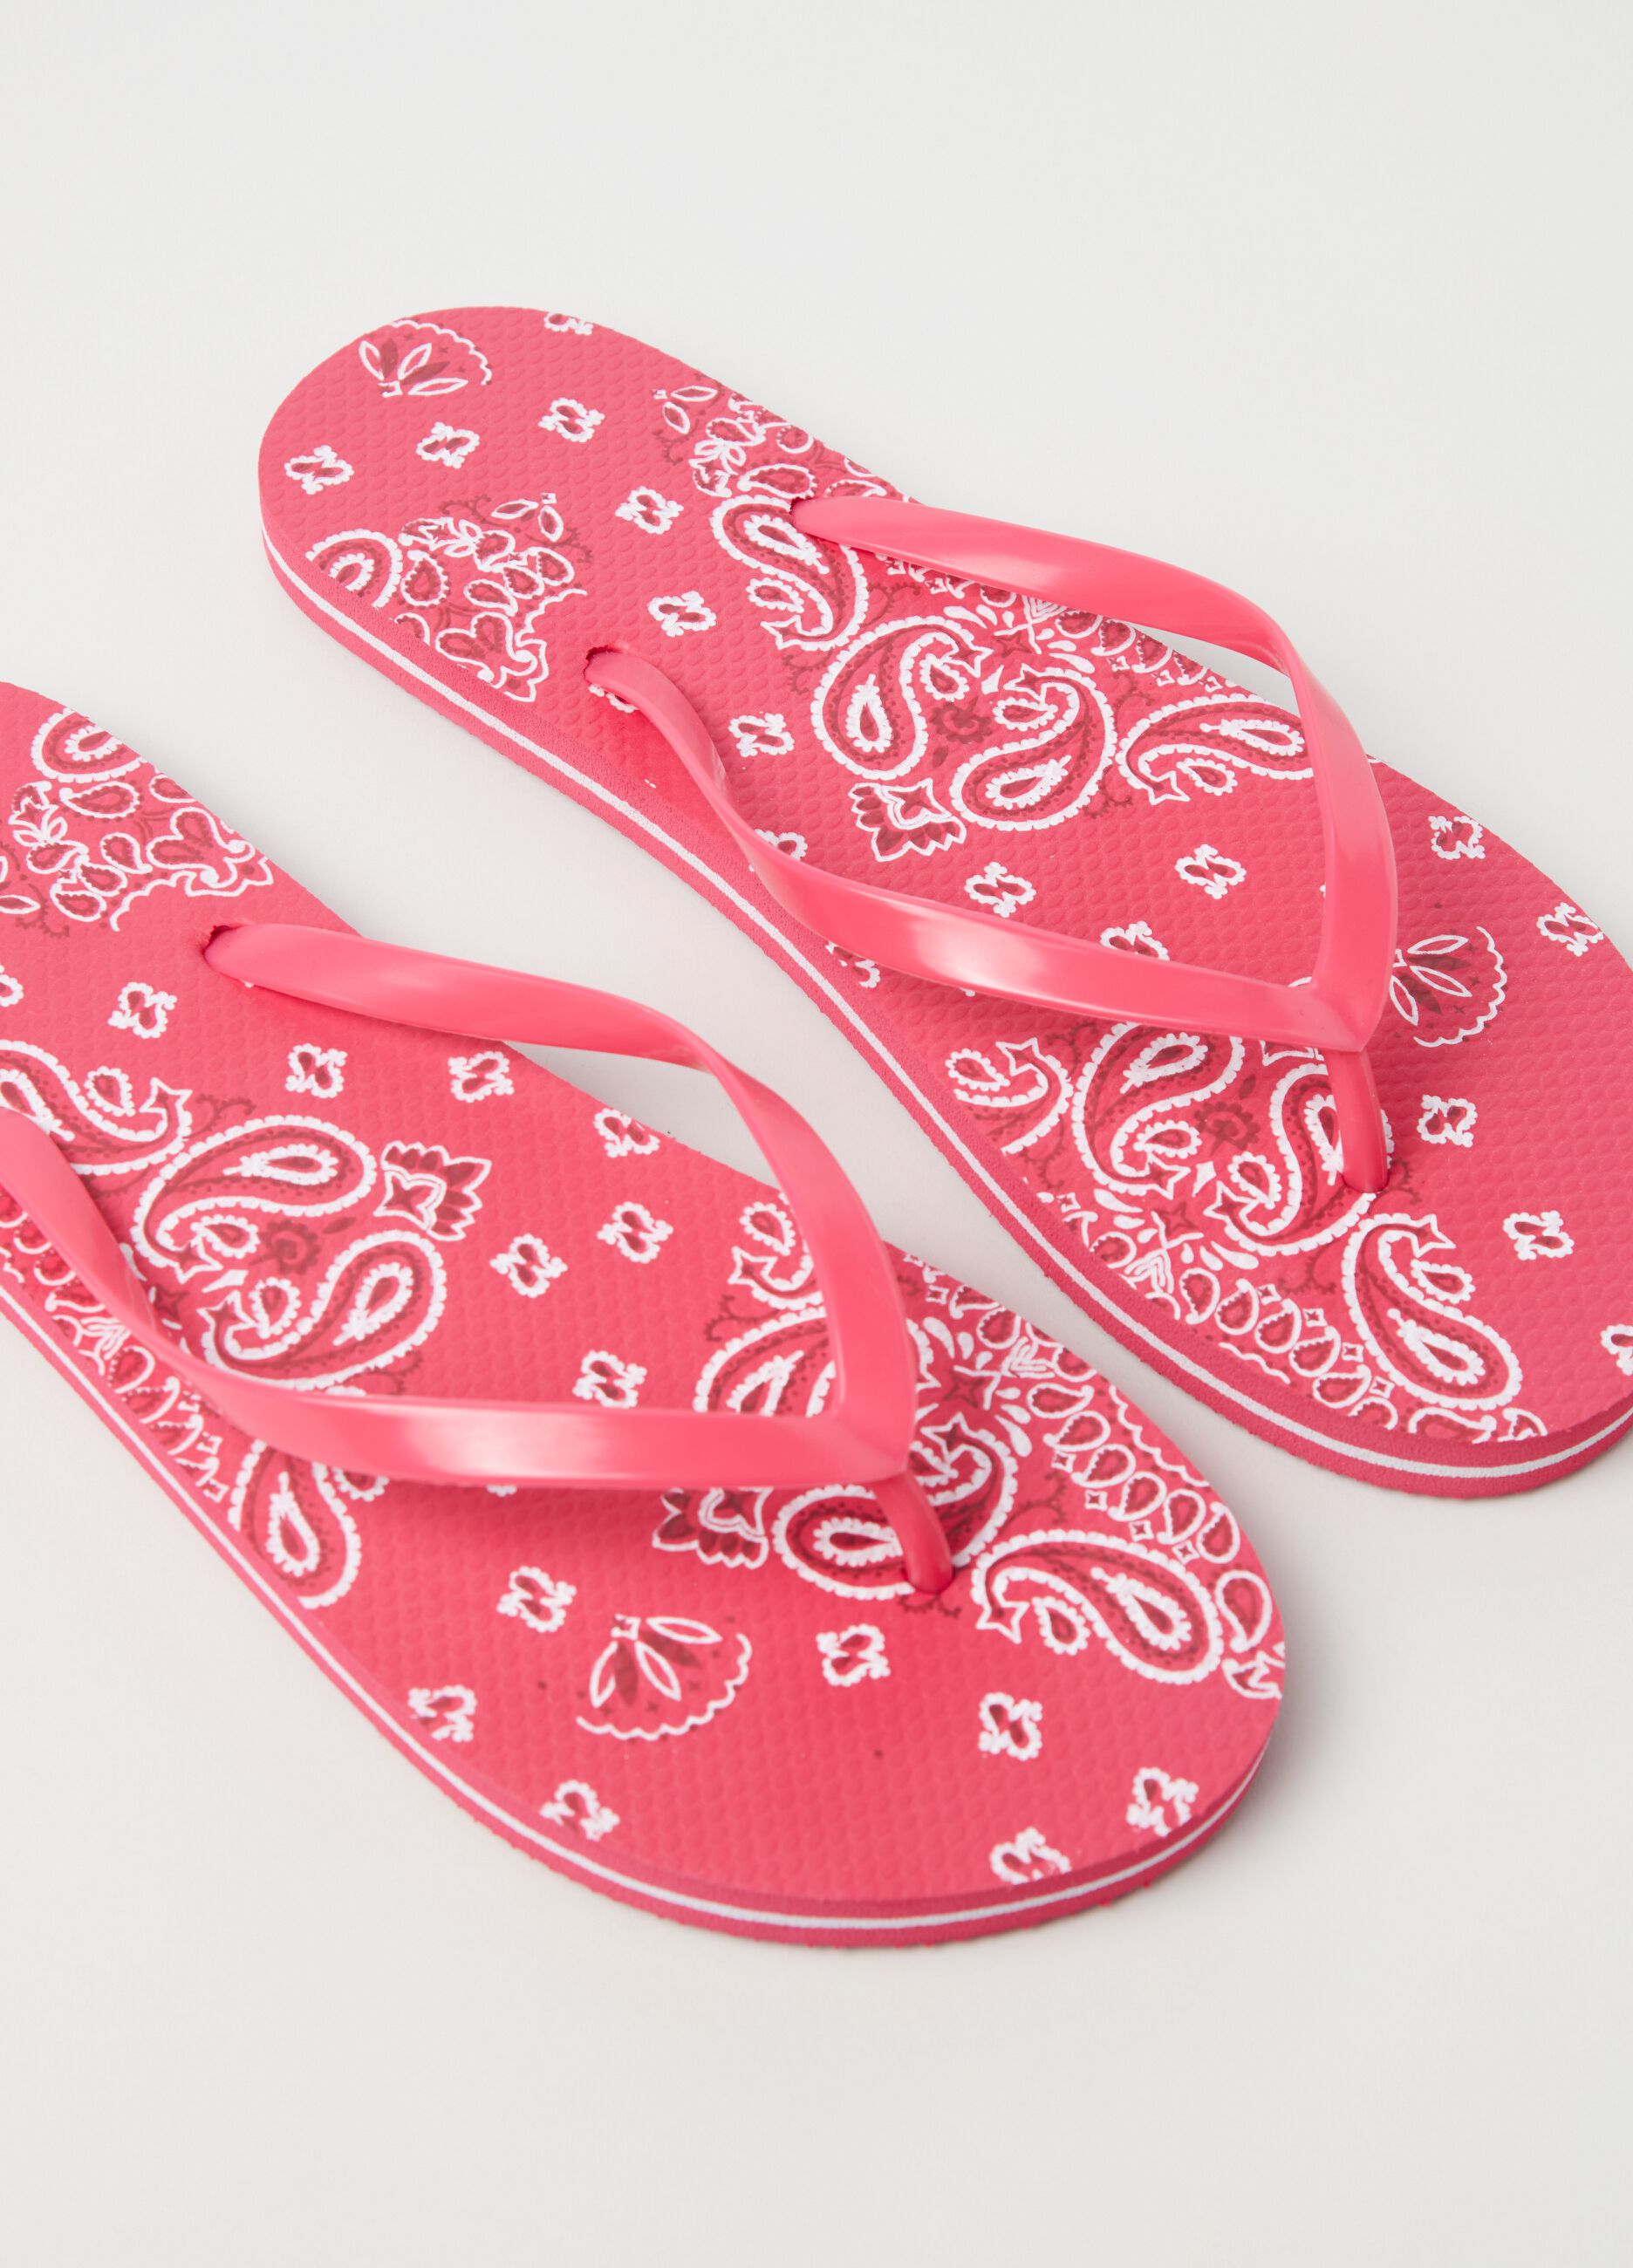 Thong sandals with cashmere print